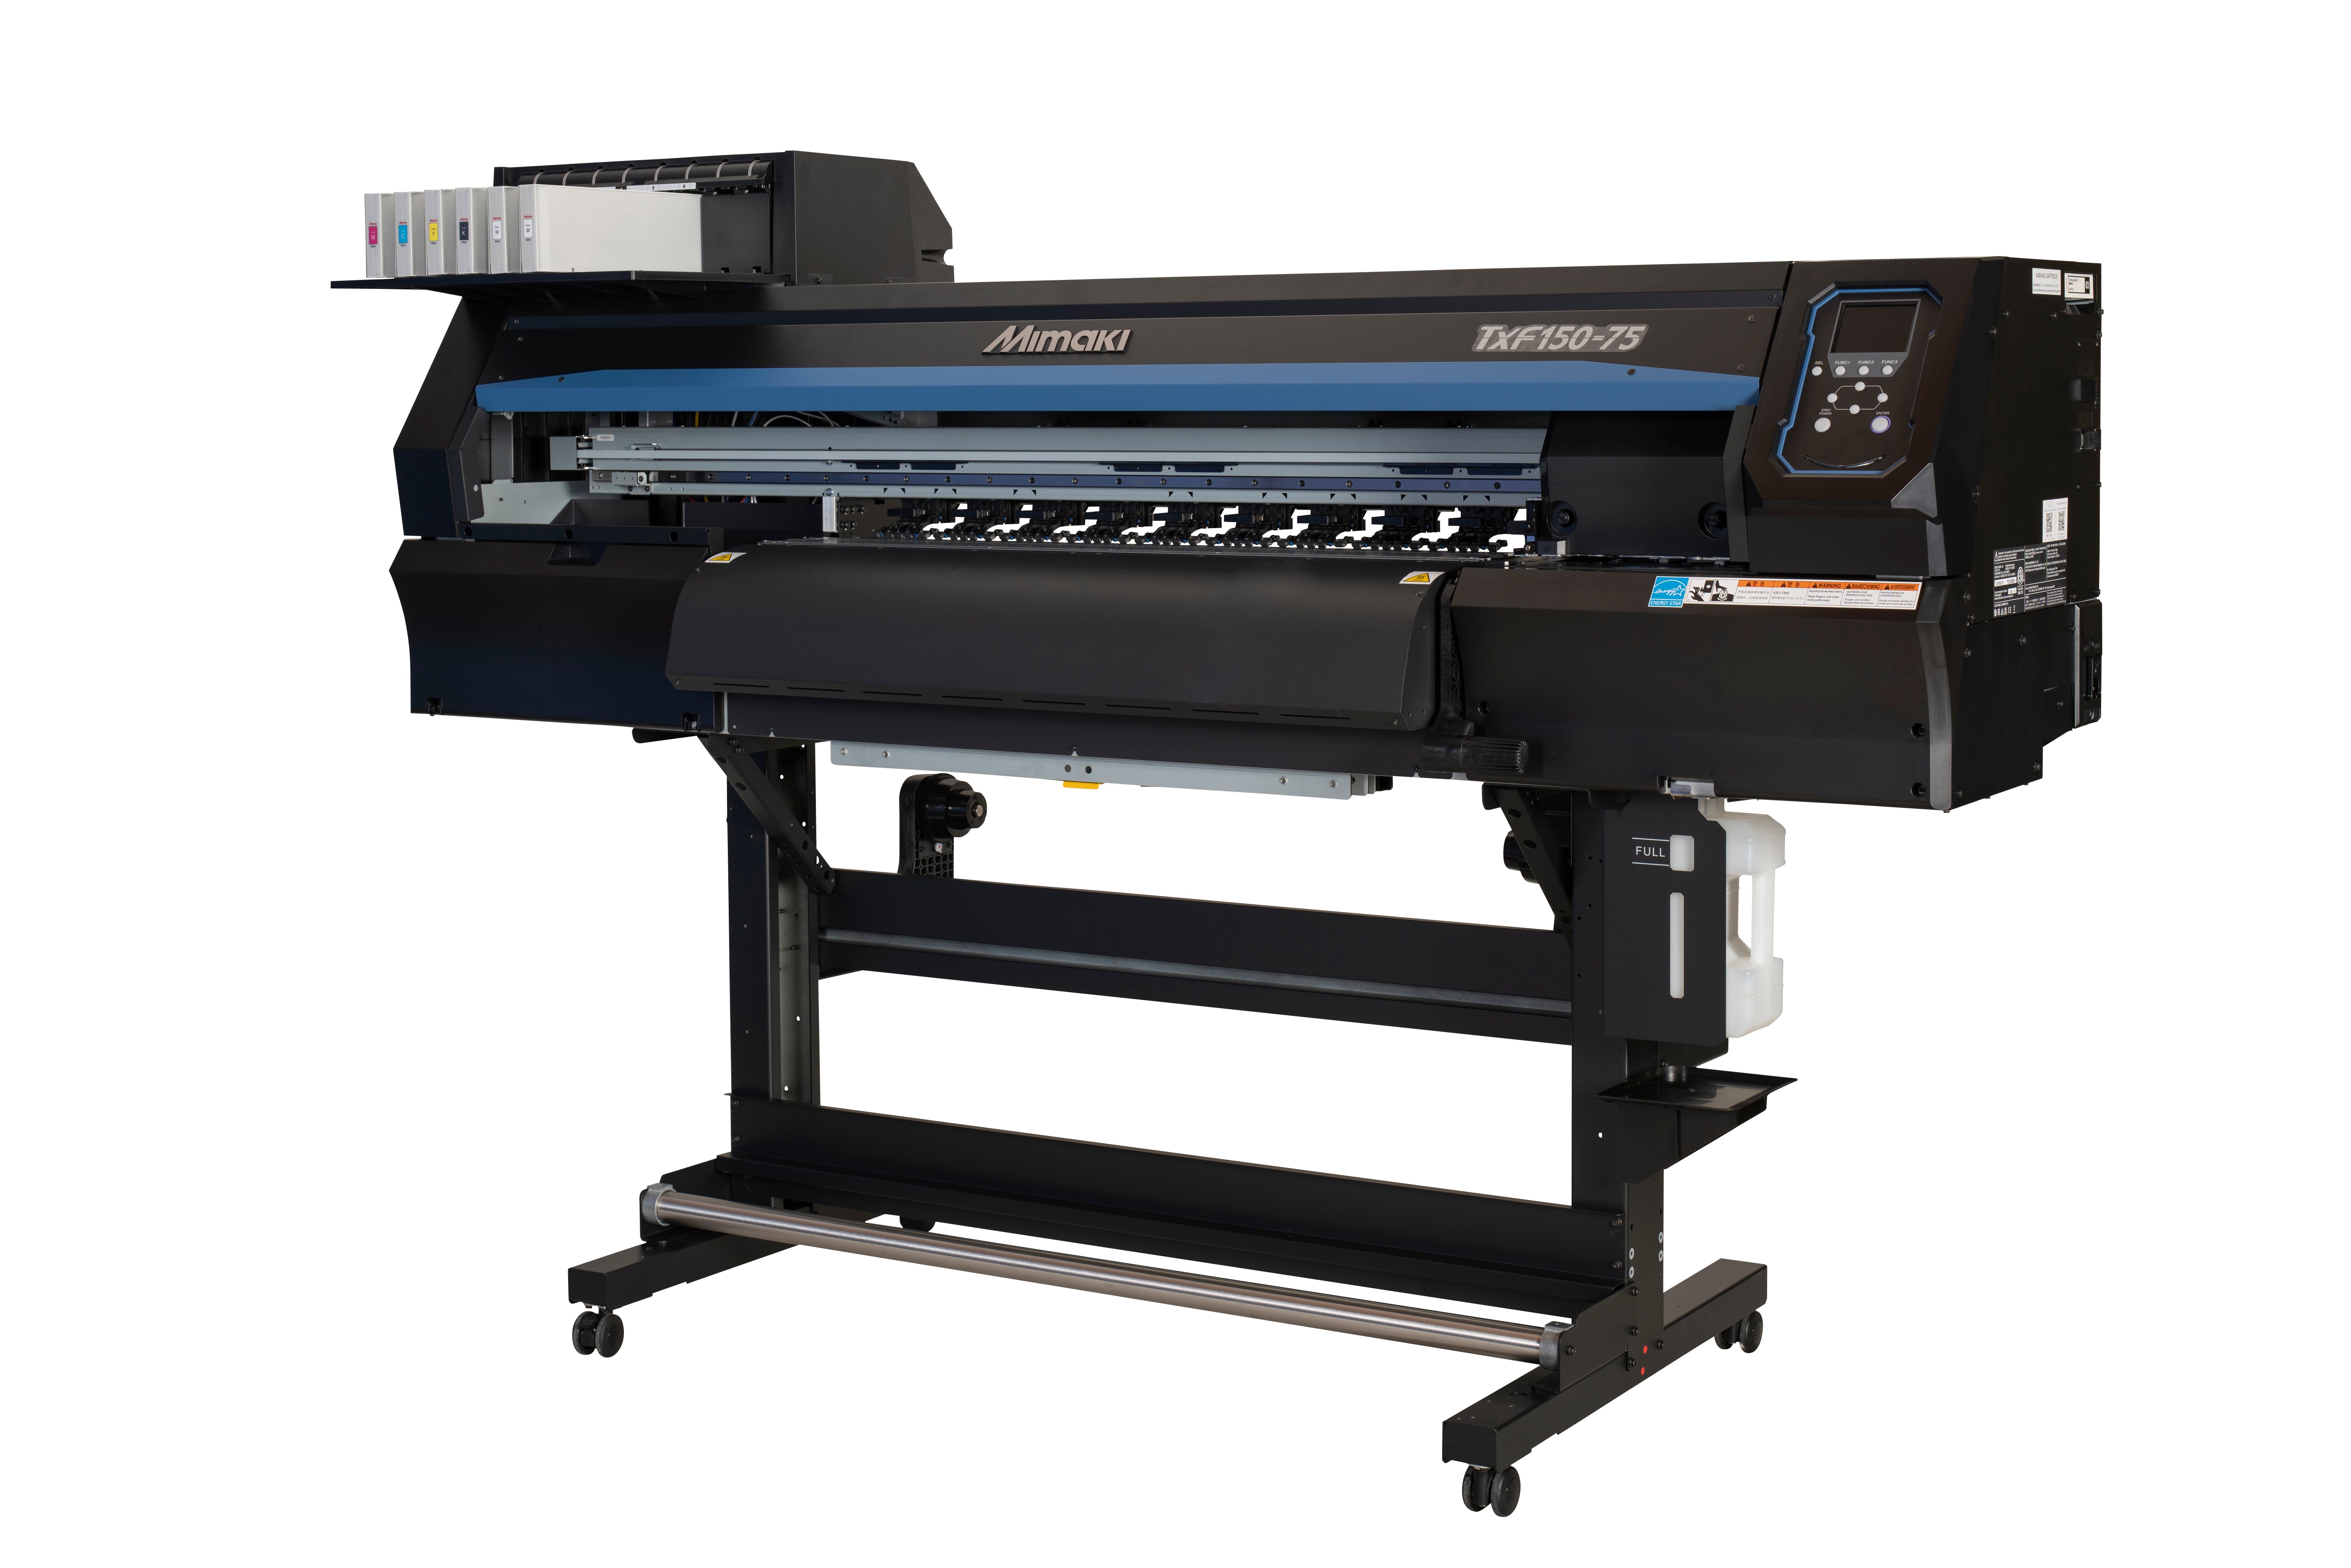 Mimaki TxF 150-75 Right Side of Printer Showing Ink 